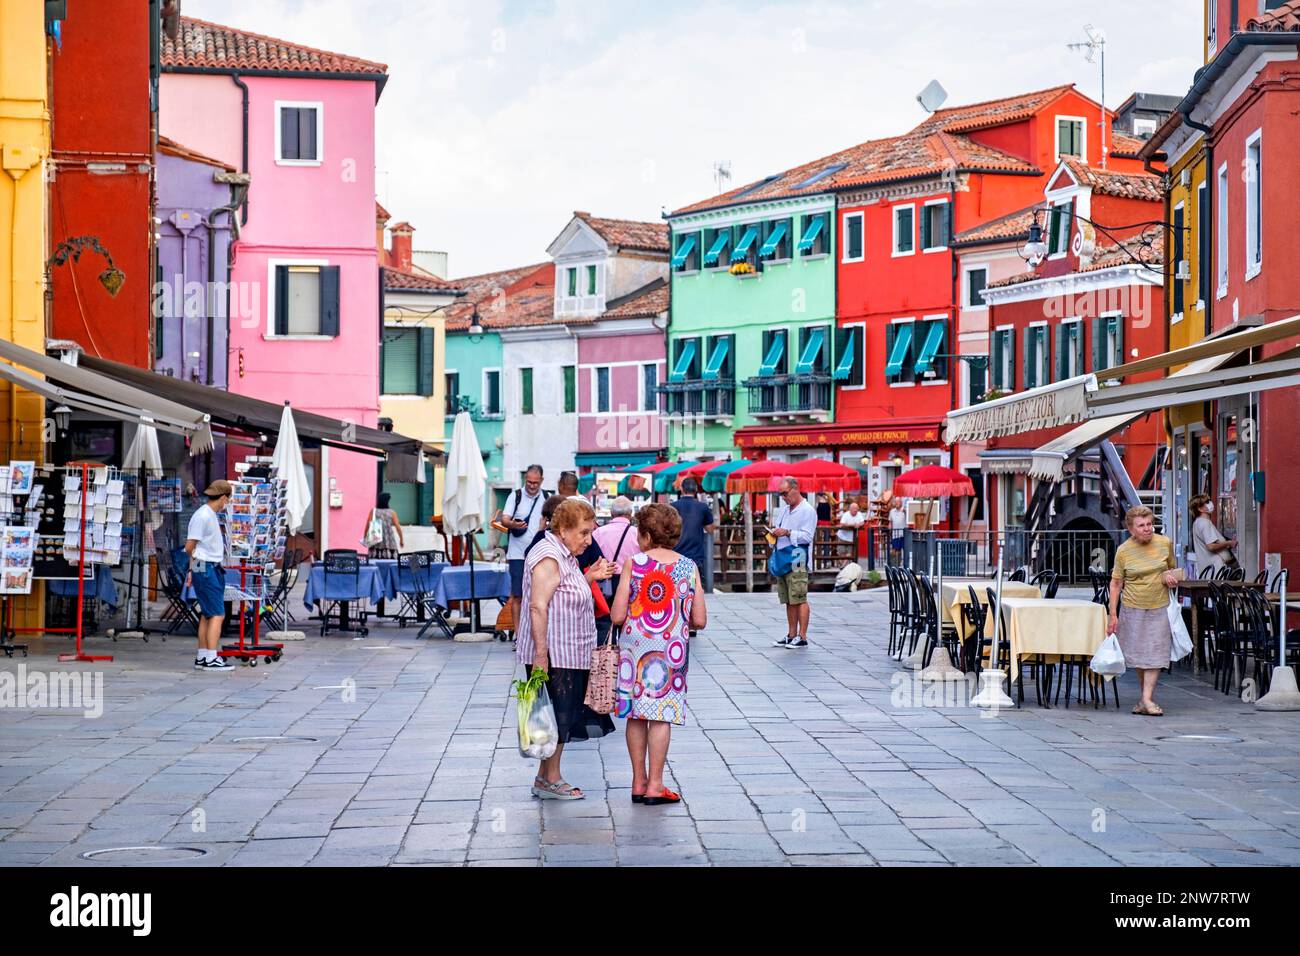 Elderly local women shopping at square with brightly coloured restaurants at Burano, island in the Venetian Lagoon near Venice, Veneto, Northern Italy Stock Photo